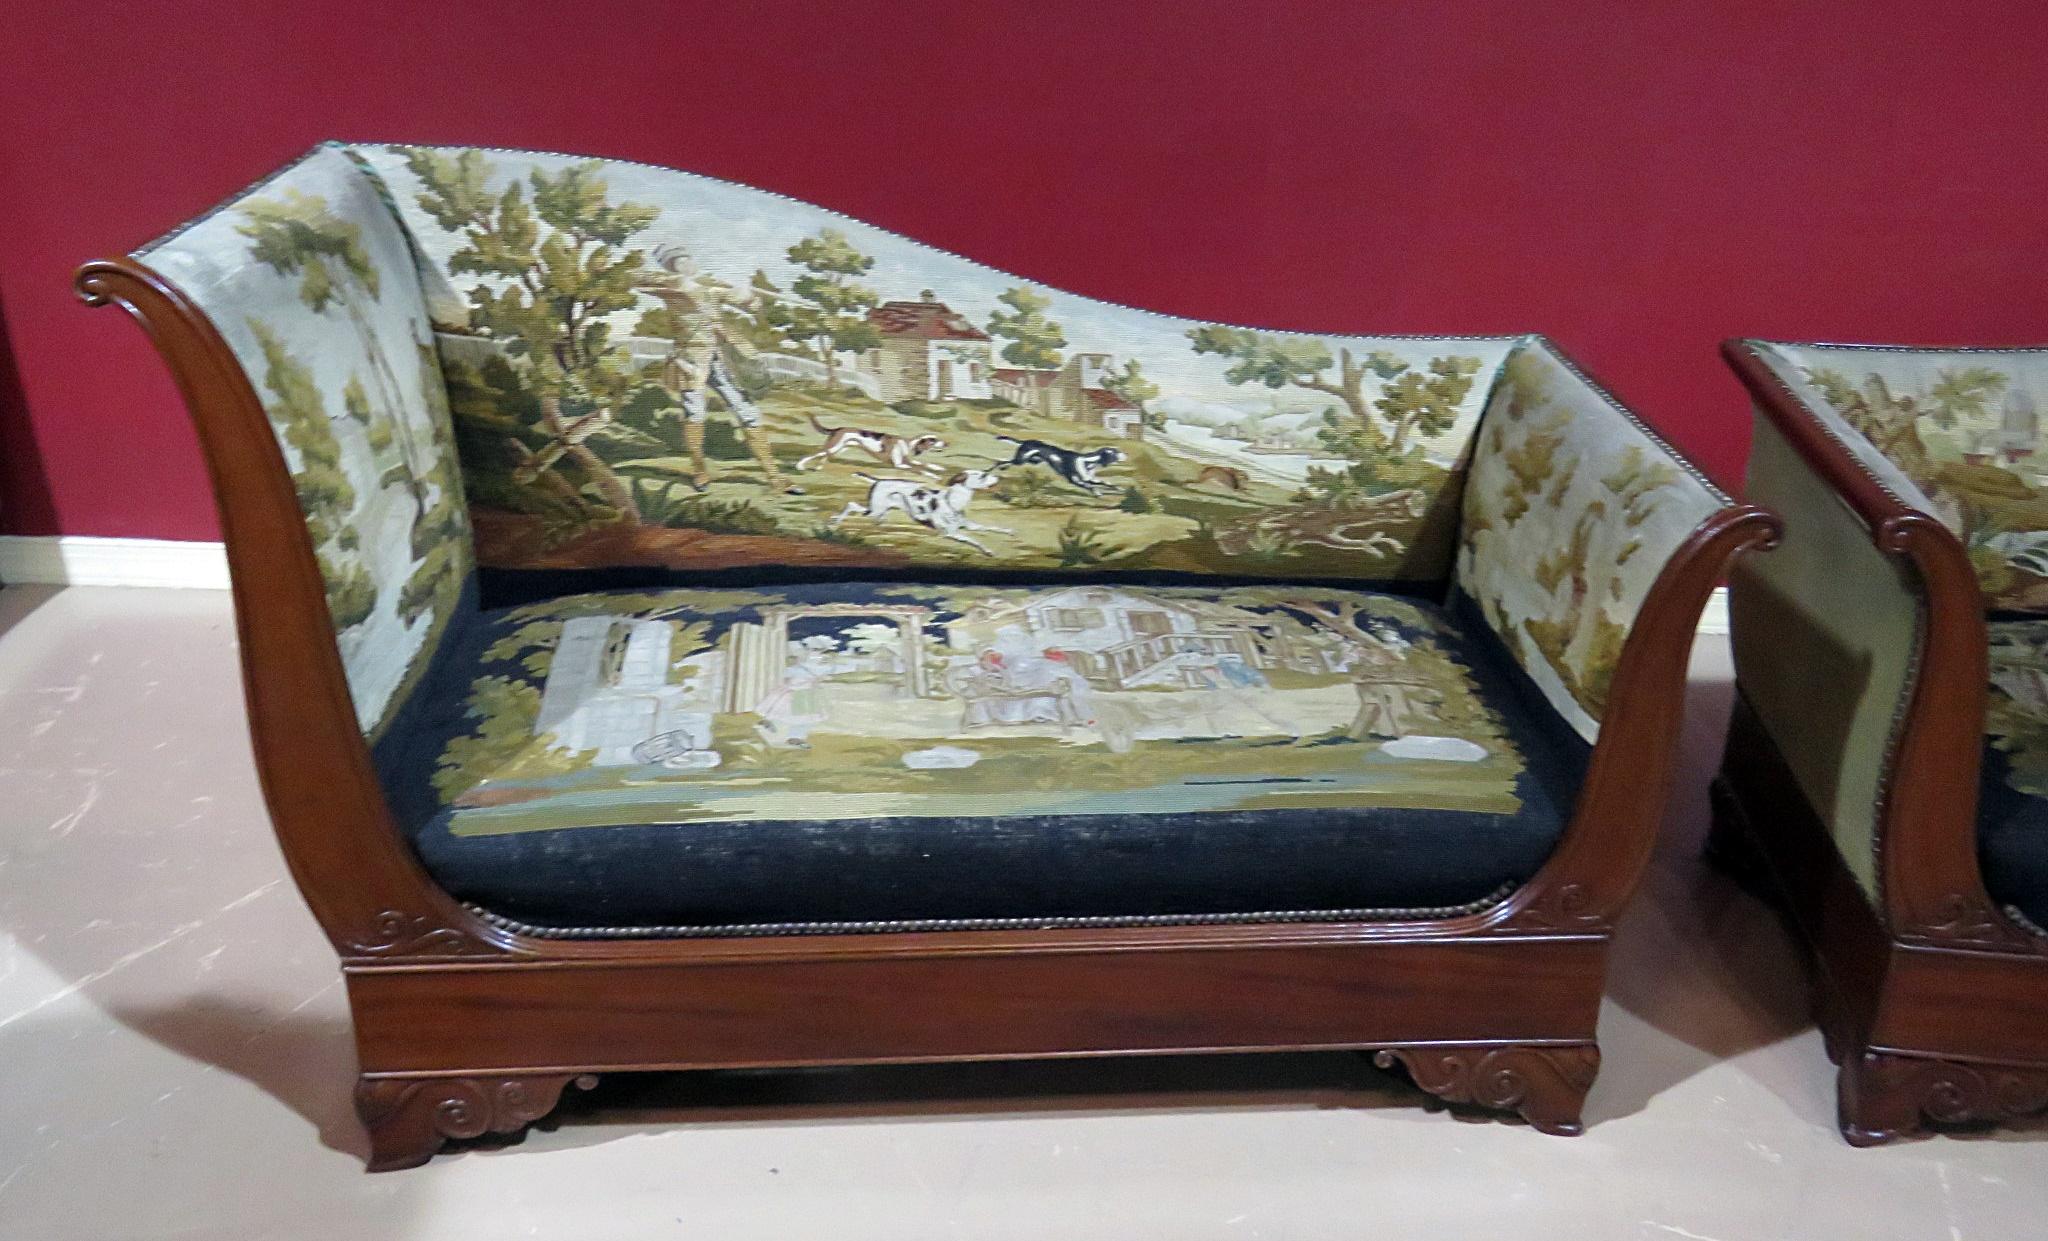 Pair of Regency style recamiers with a sleigh end, dropped shape back, rounded end, nailhead trim, and needlepoint upholstery. The upholstery depicts different scenes of hunting, courtship and even spinning tarn. Beautiful detail and great patina. 